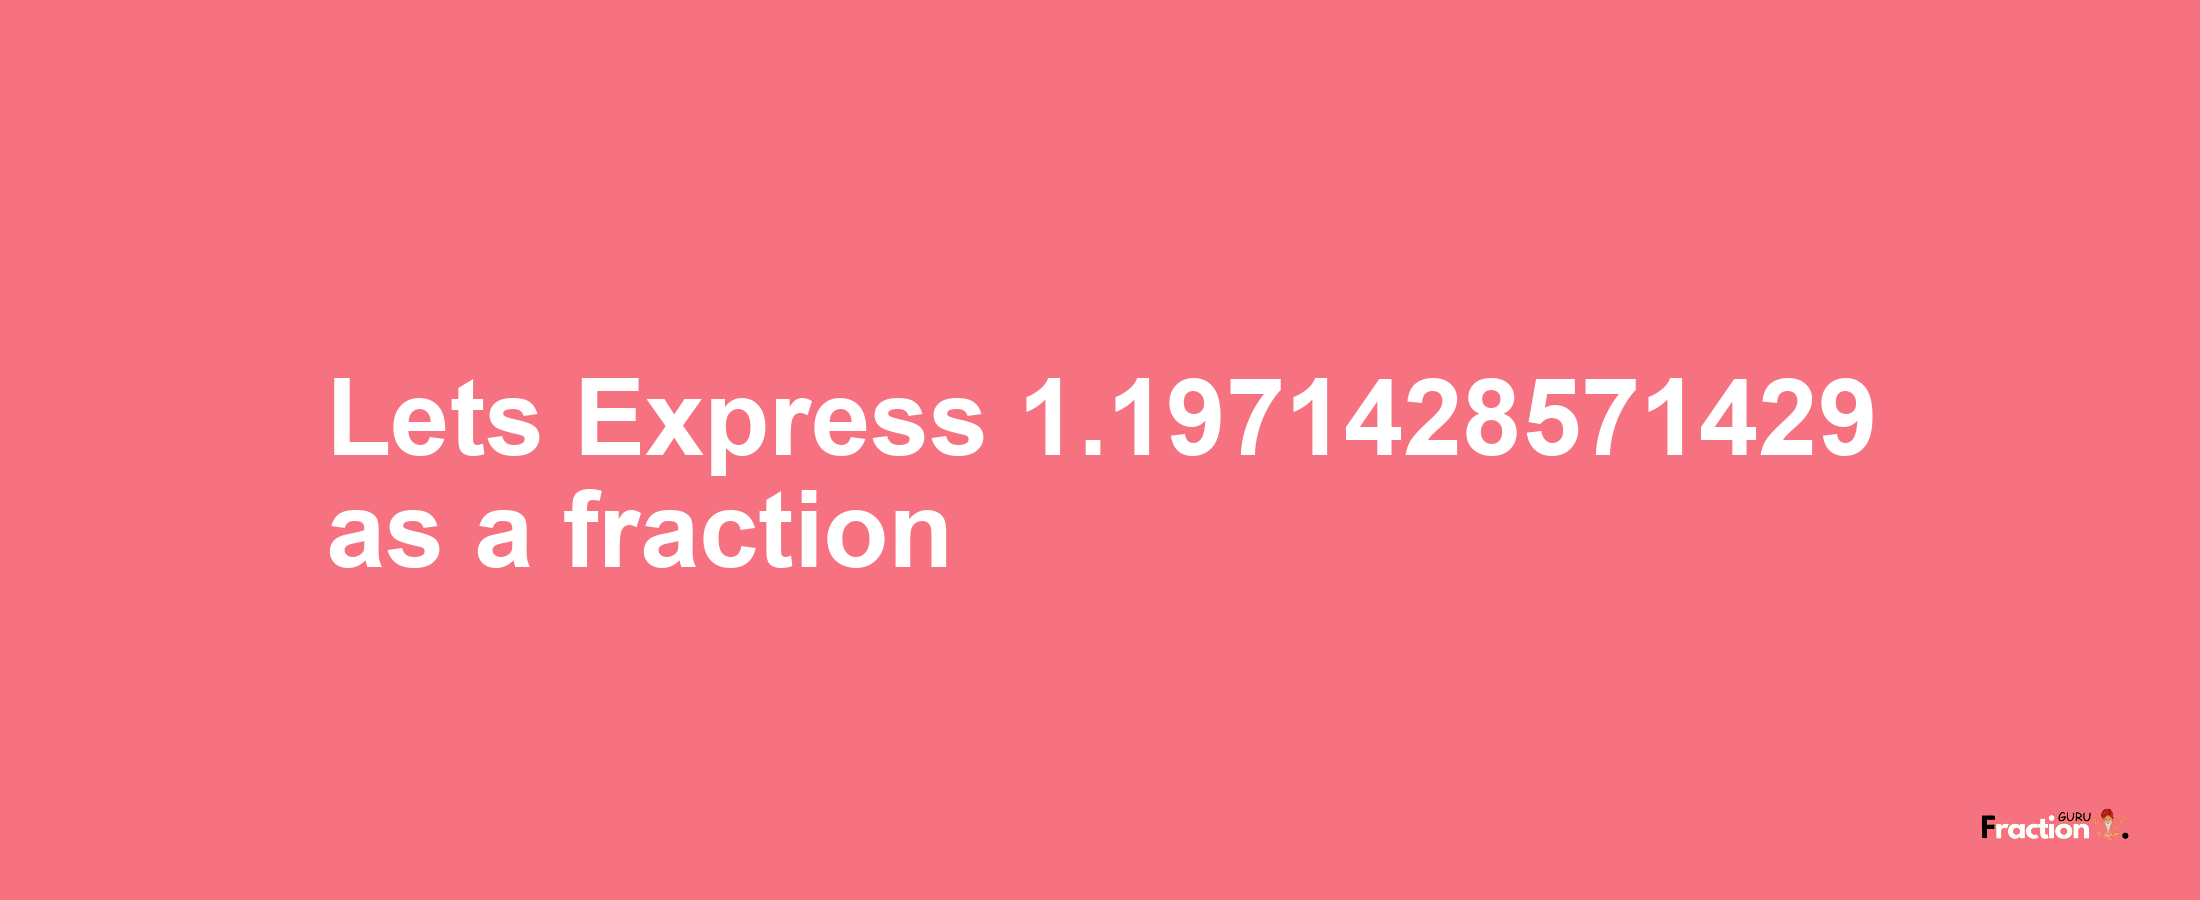 Lets Express 1.1971428571429 as afraction